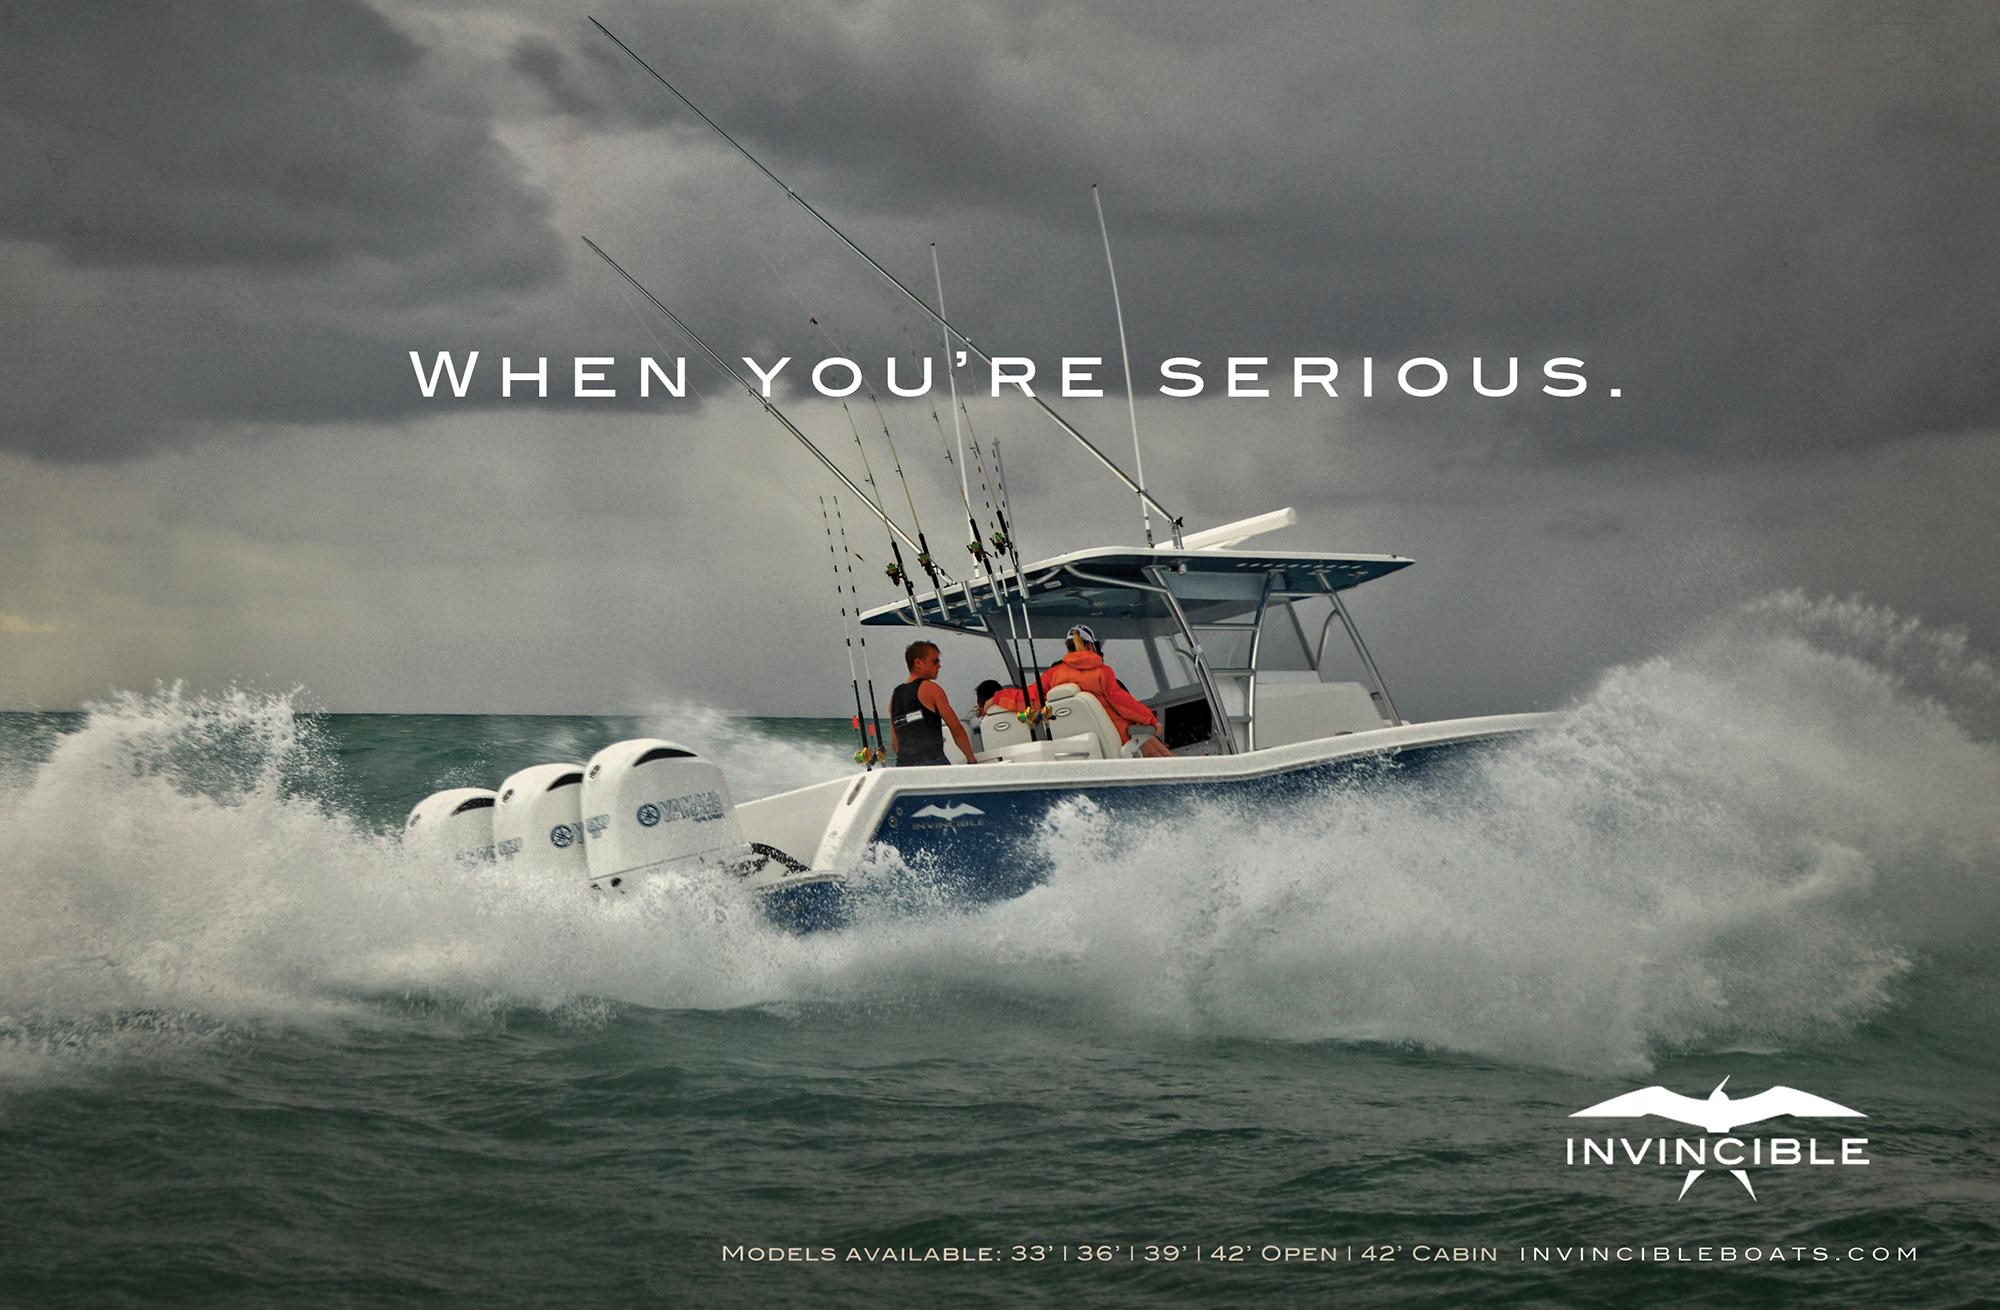 Invincible Boats Advertising When You're Serious